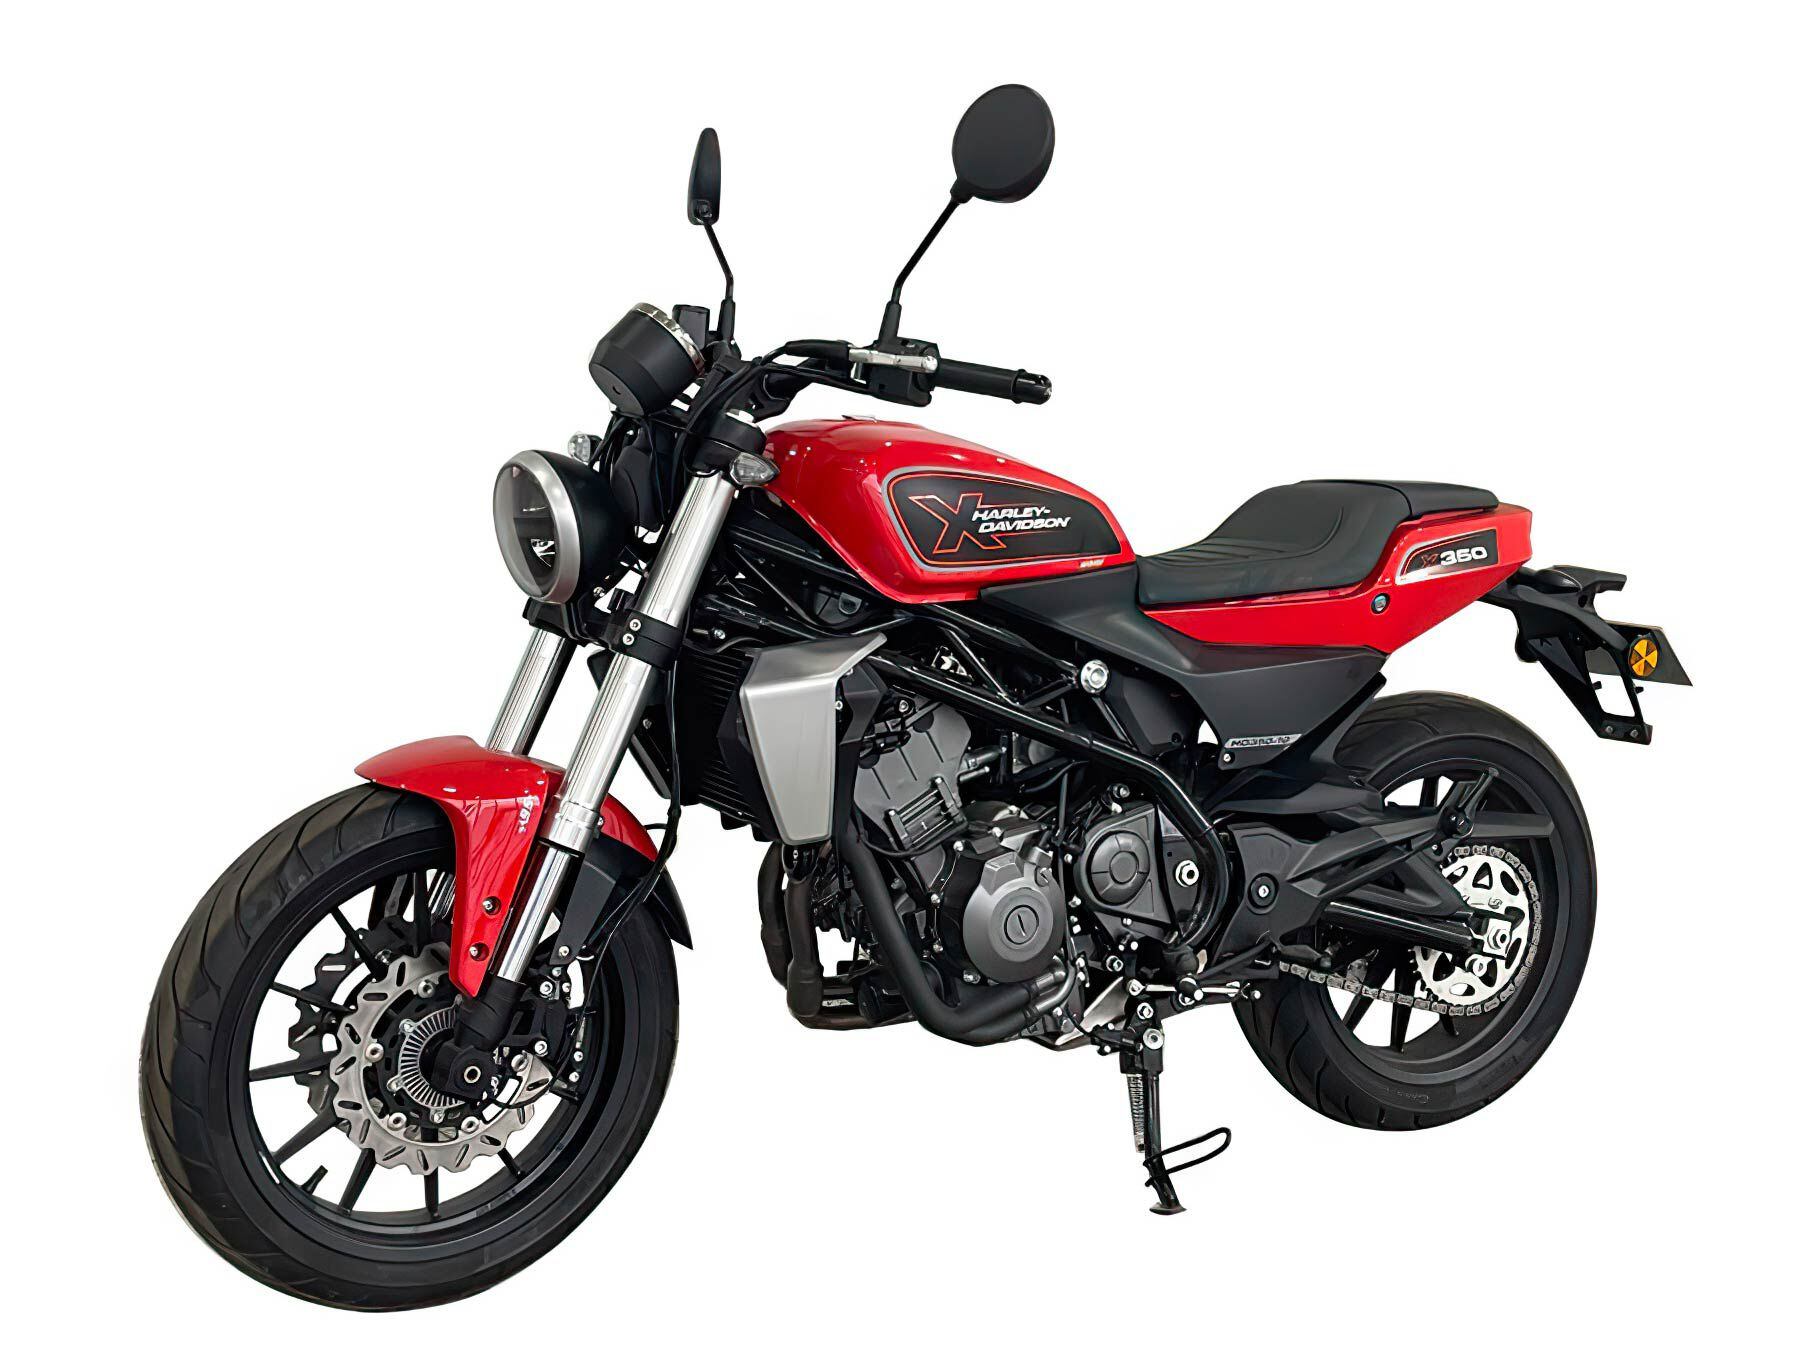 The 353cc engine in the Harley-Davidson X350 is shared with other Benelli models.